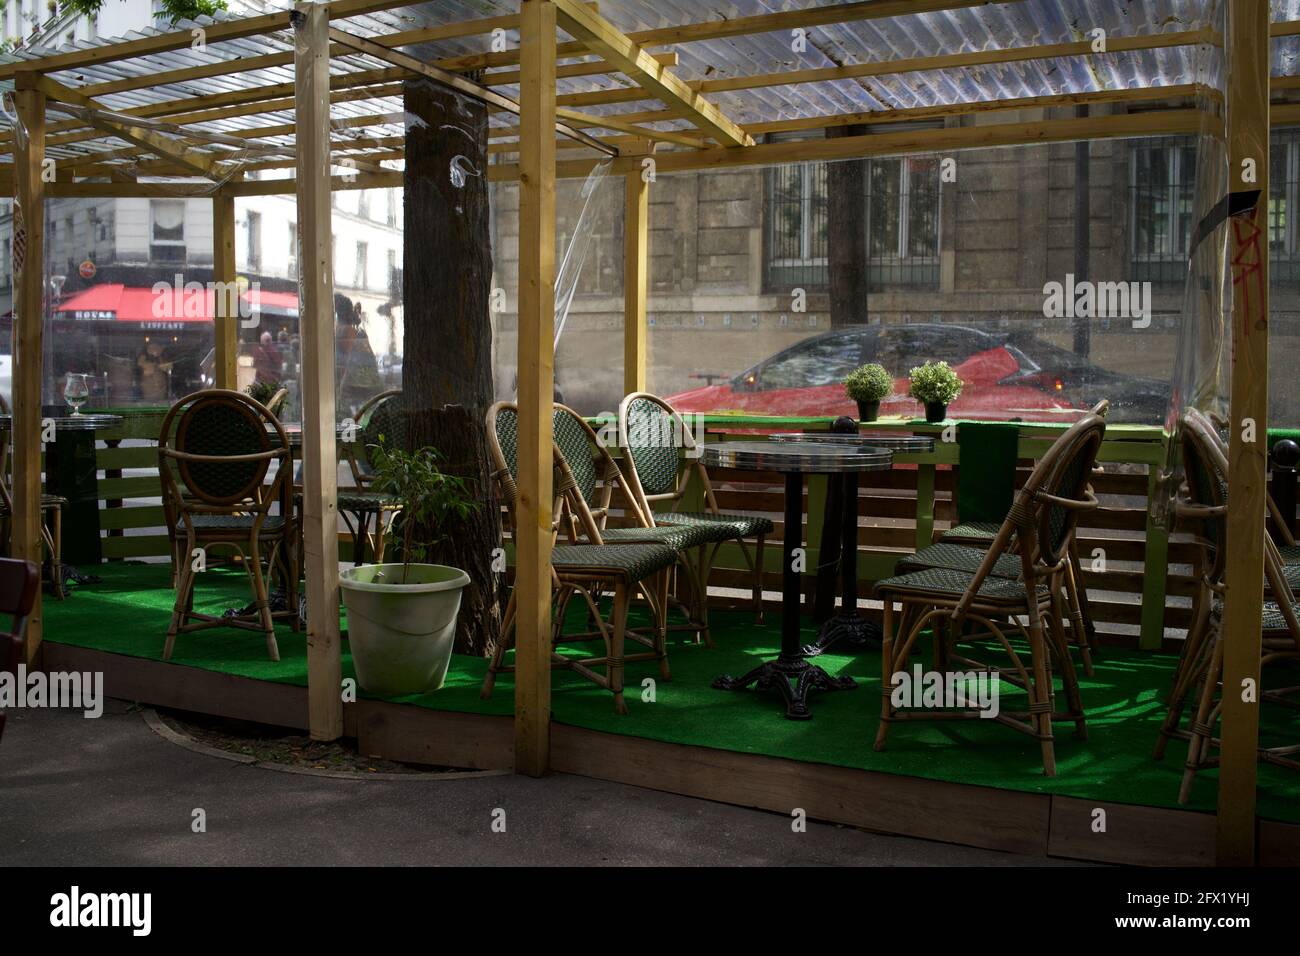 An empty cafe terrace awaits customers, one of many temporary terraces constructed on Paris' pavements to enable customers to drink outside after Covid-19 restrictions were eased in May 2021 - Le Montmartre Café, Rue Custine, 75018, Paris, France Stock Photo